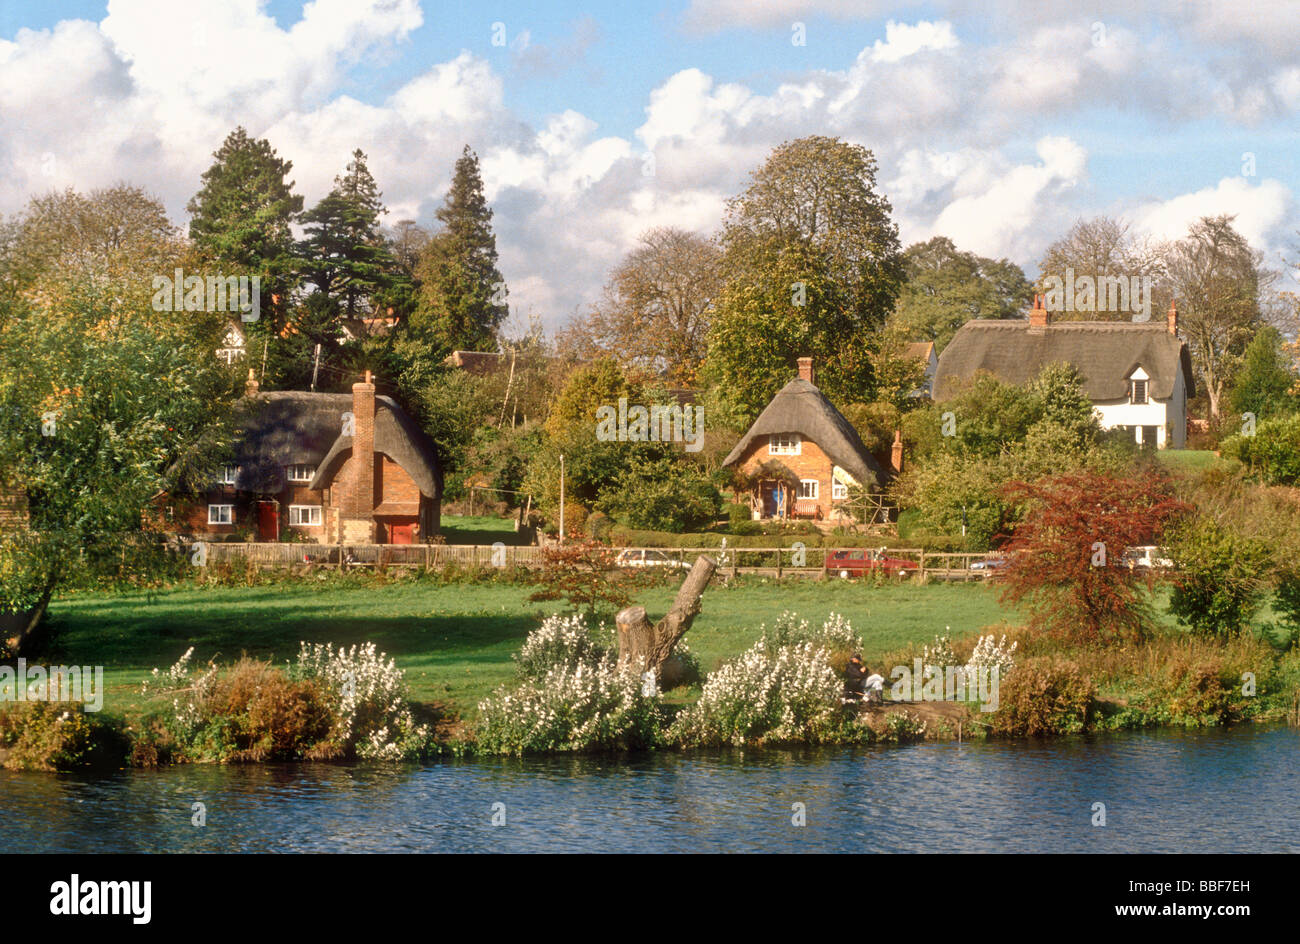 Thatched cottages by the River Thames at Clifton Hampden in Oxfordshire England UK Stock Photo